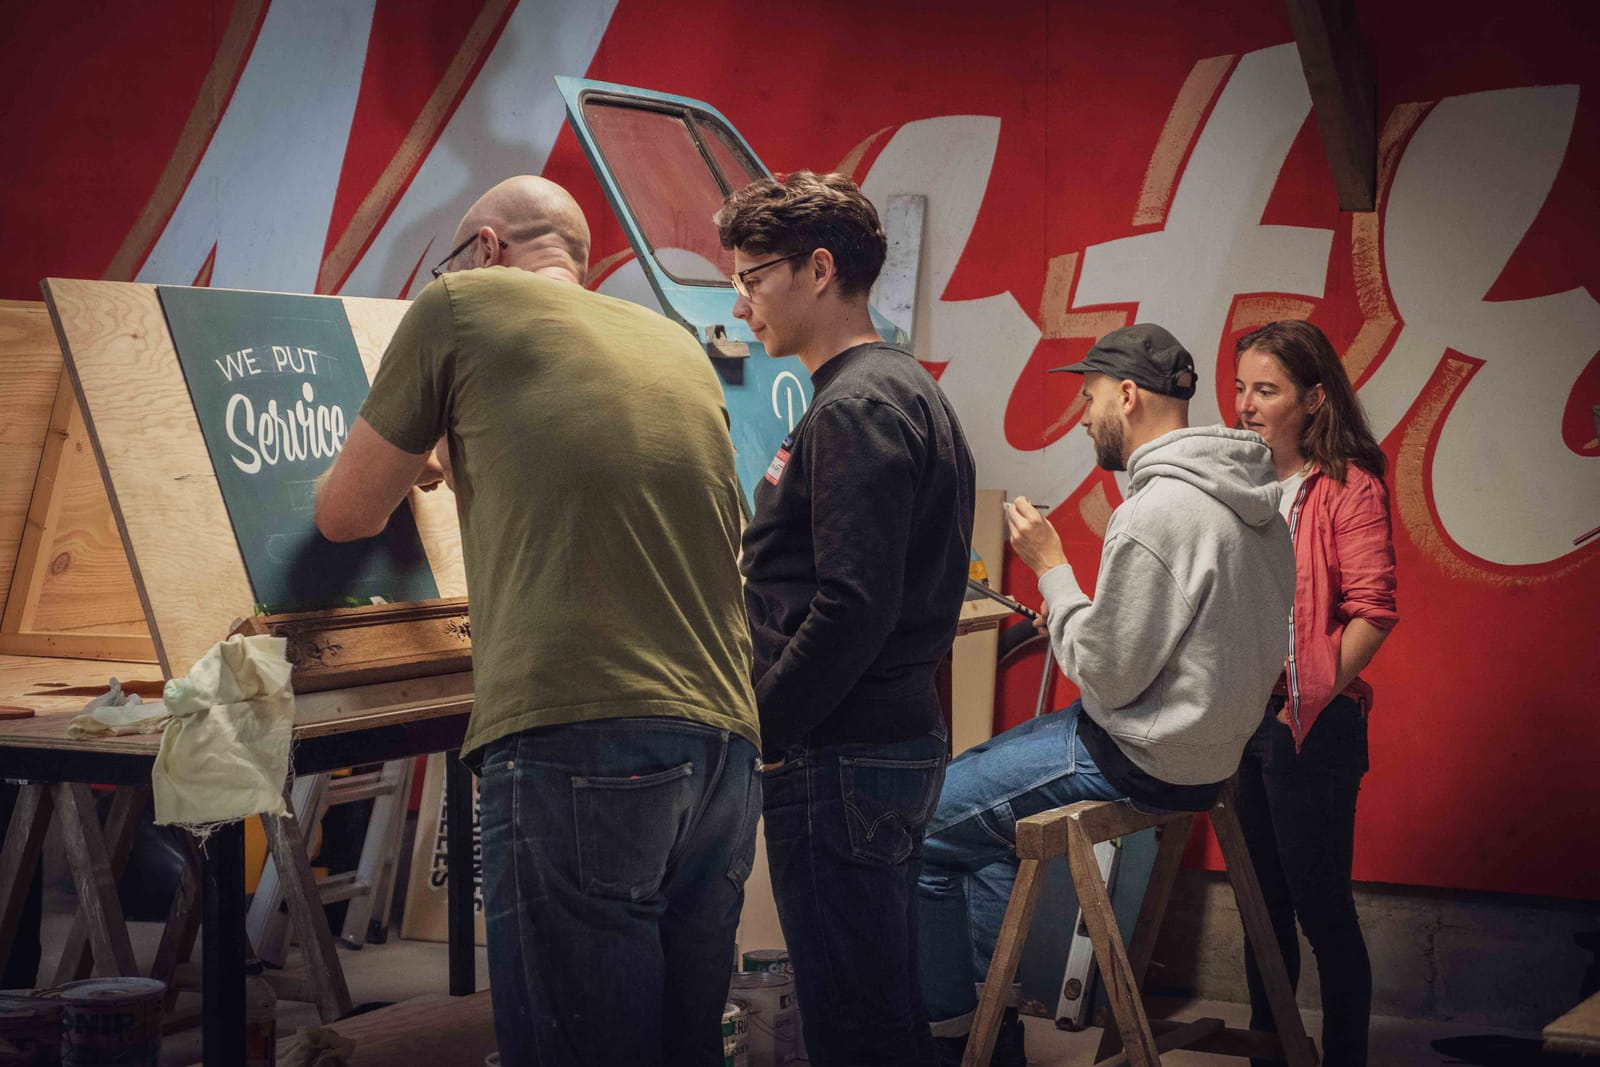 Four people at different points along a wide wooden easel. They are painting letters and talking with each other in pairs.